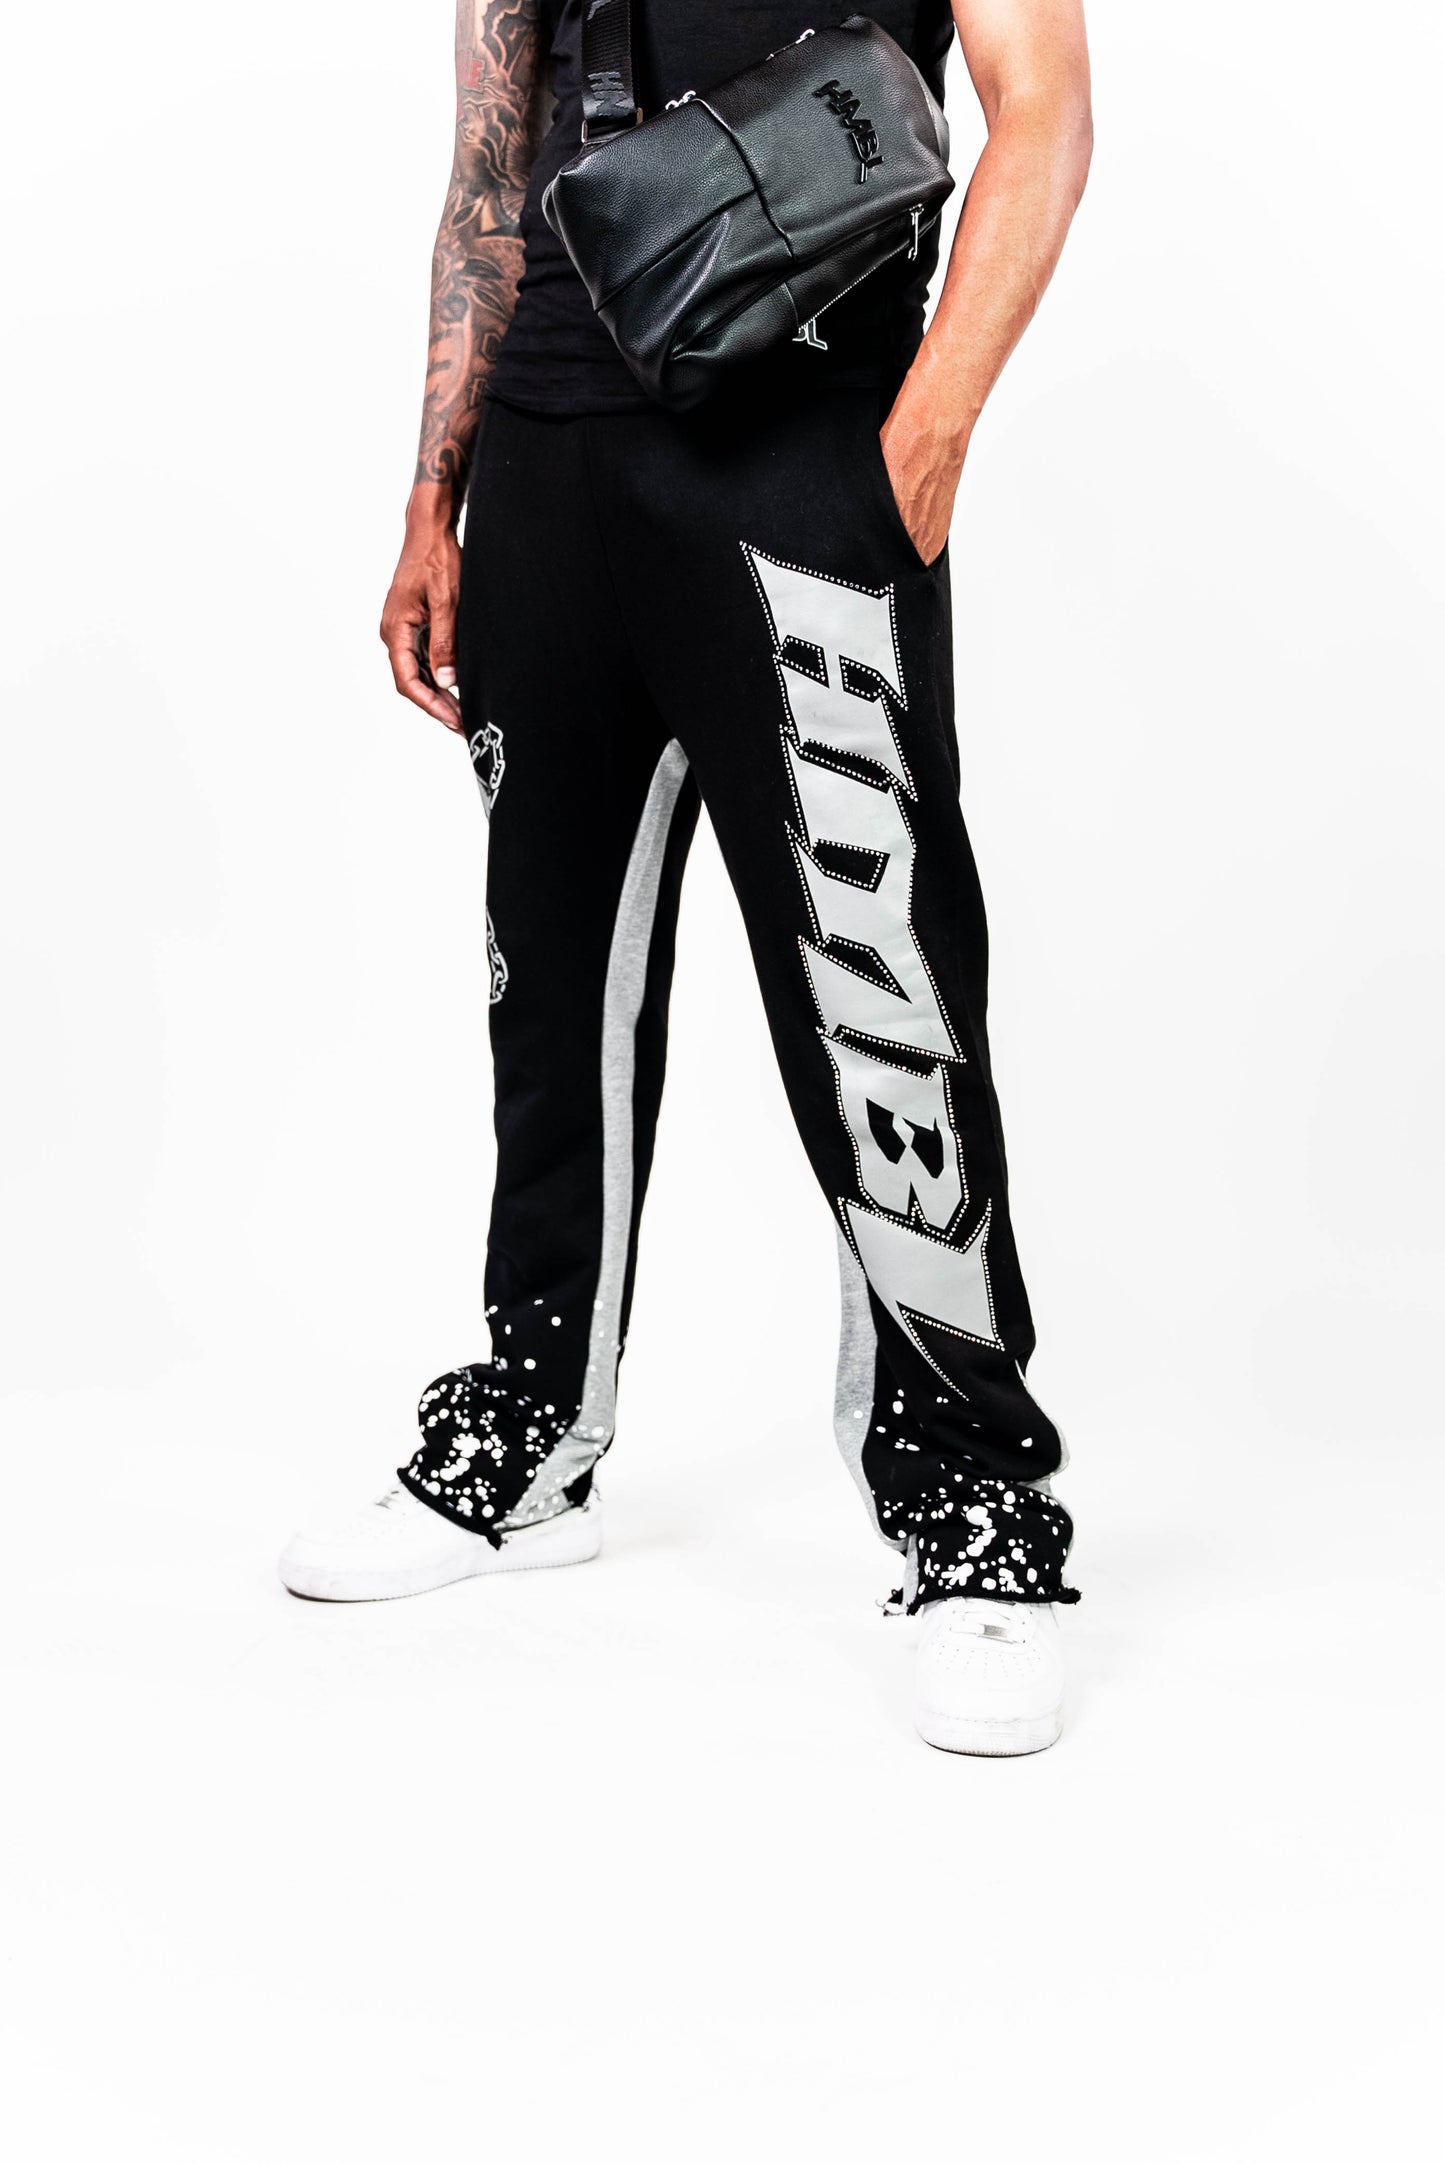 Black grey painted stacked pants